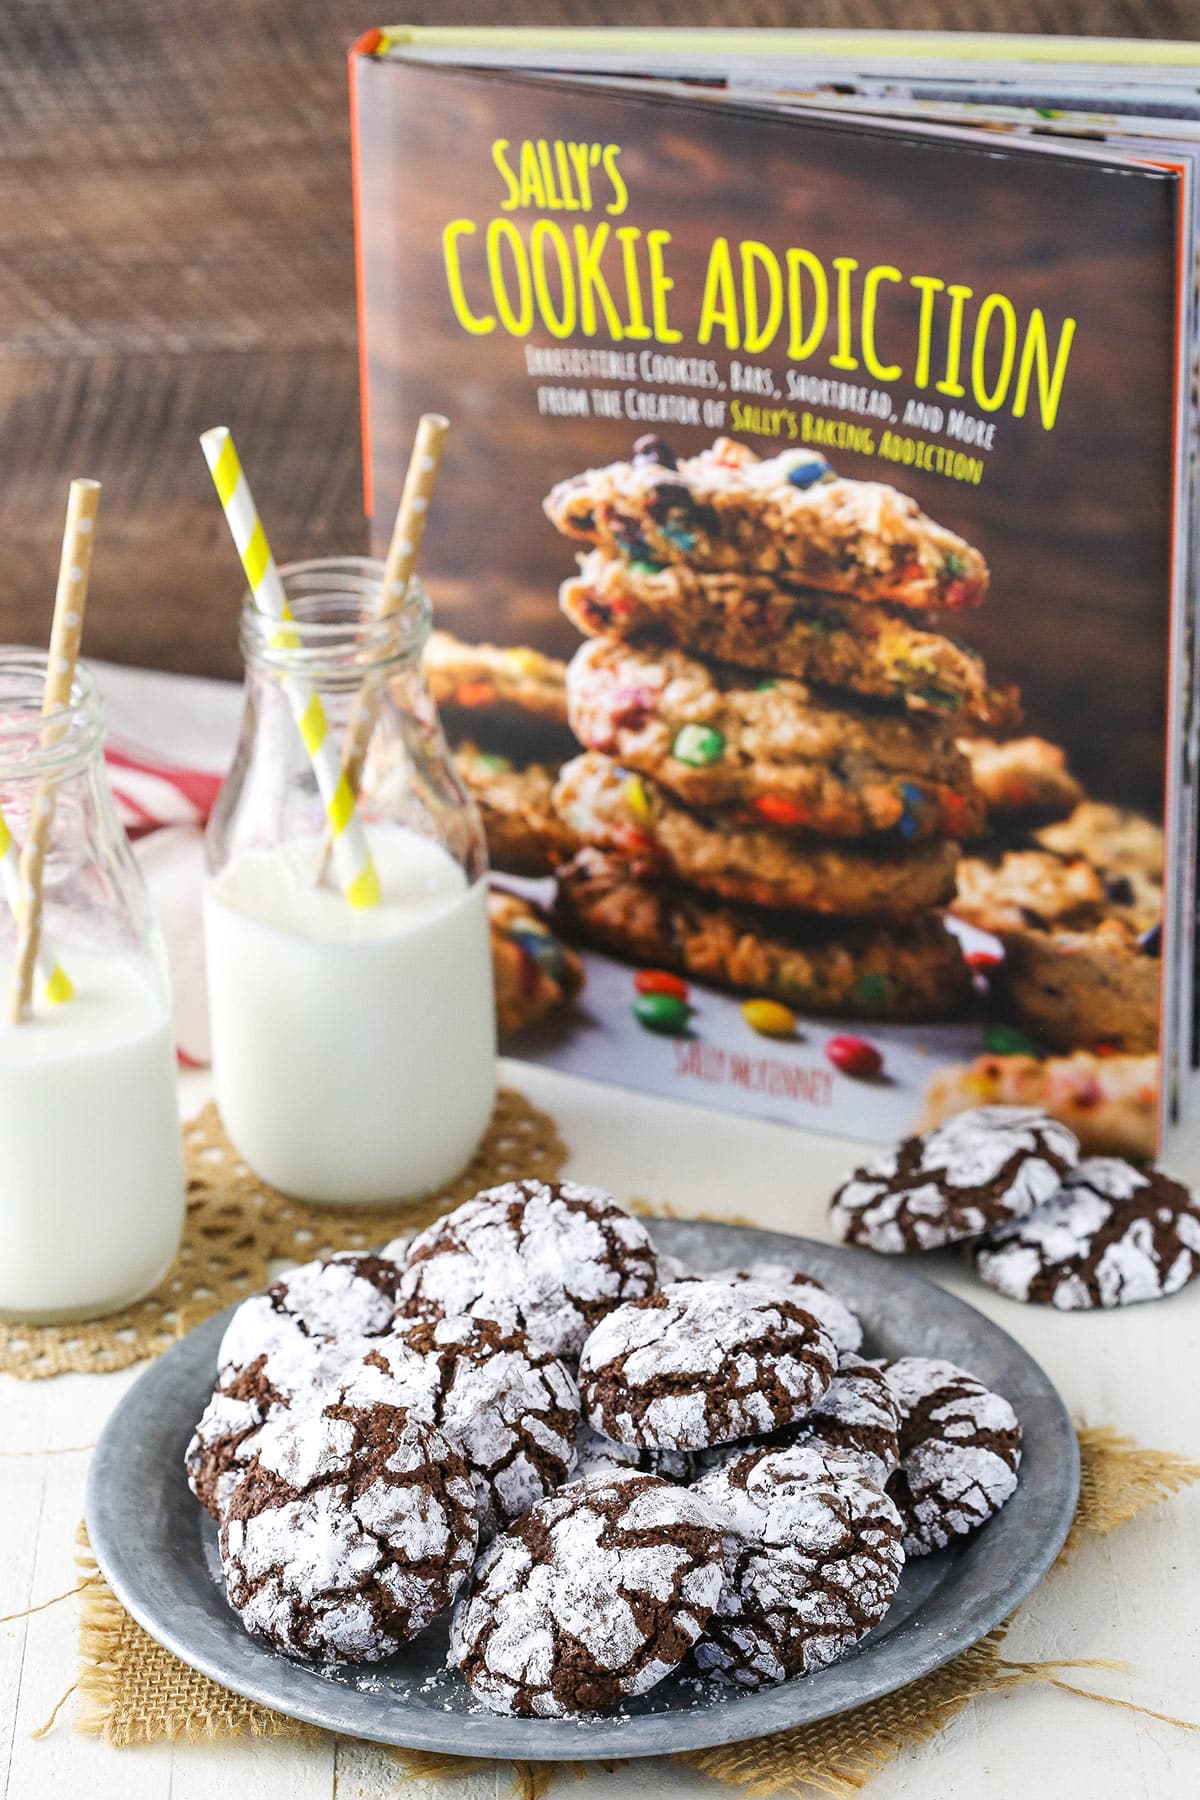 Chocolate crinkle cookies on a plate with a cookbook in the background.